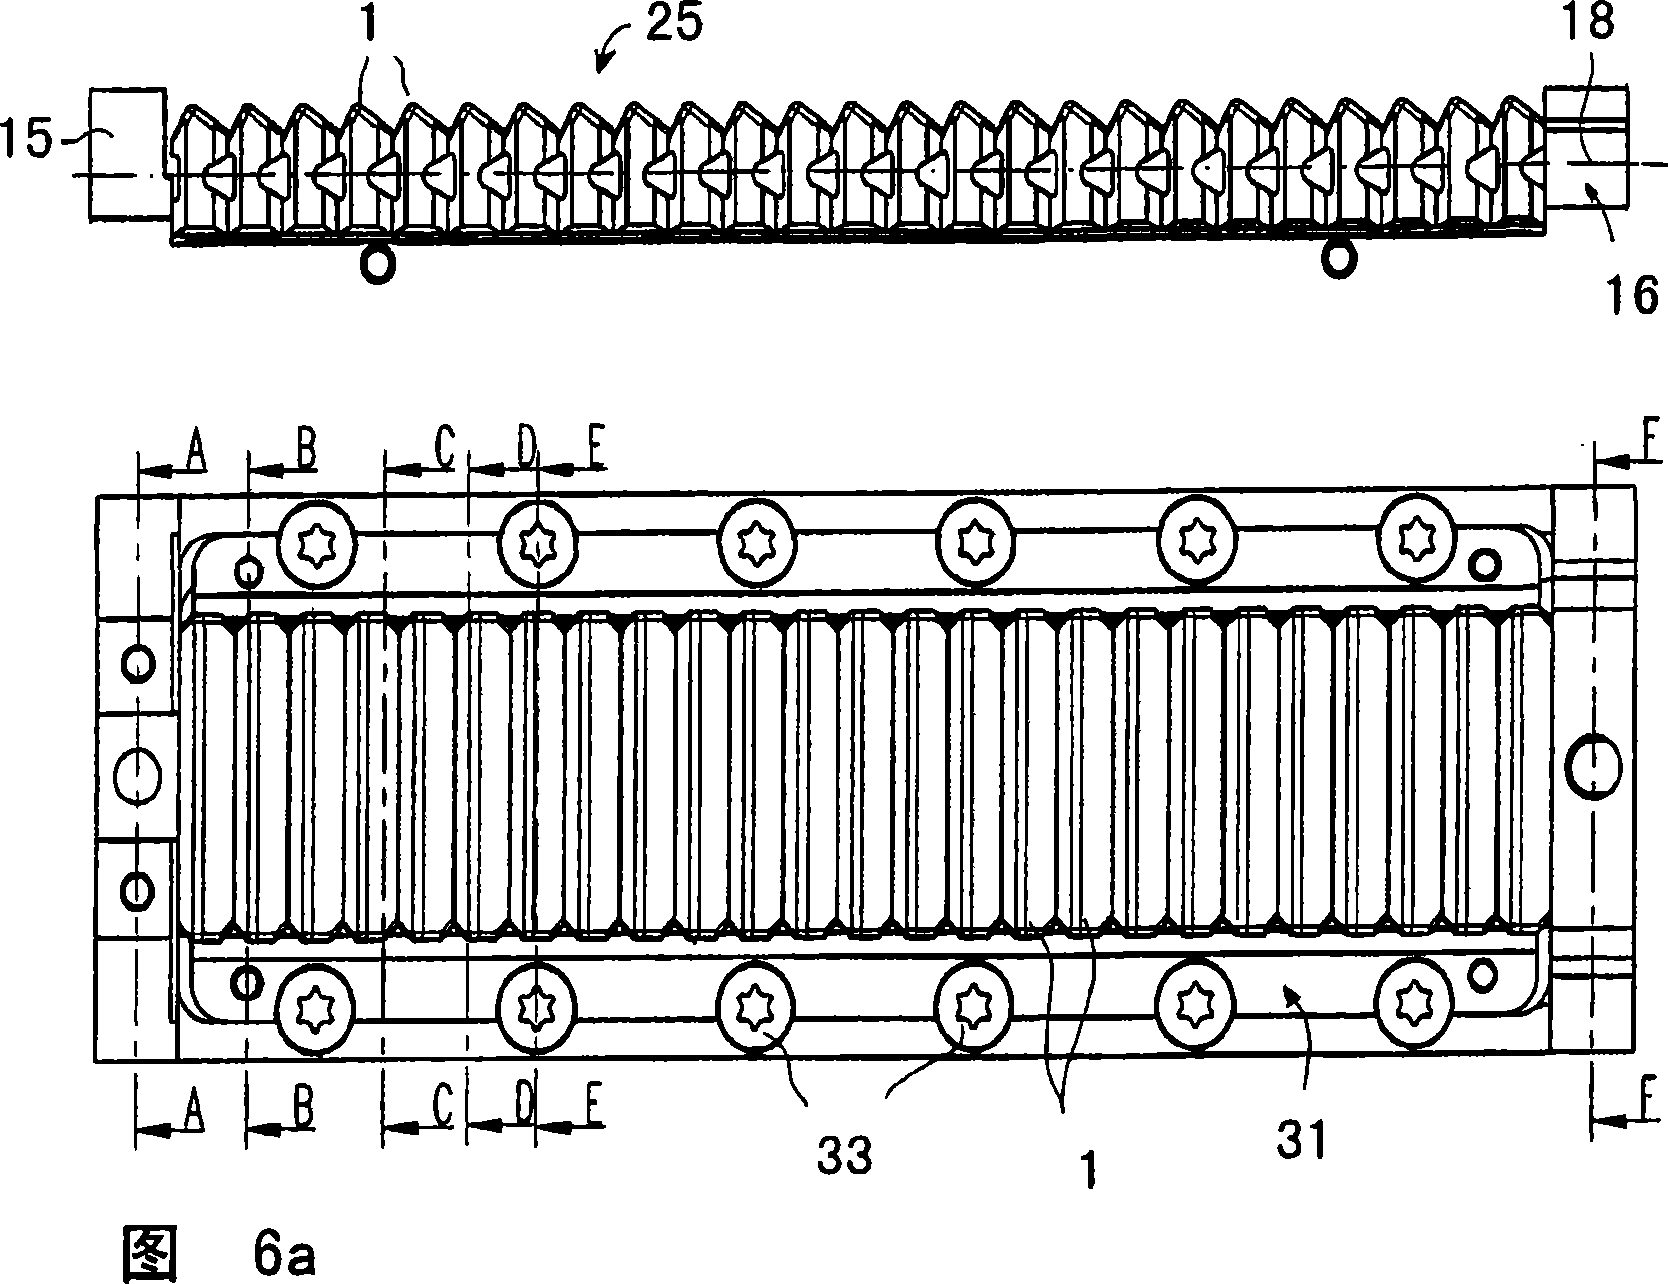 Device and method for treating filament yarn and fancy knotted, migrated, and false-twist yarn